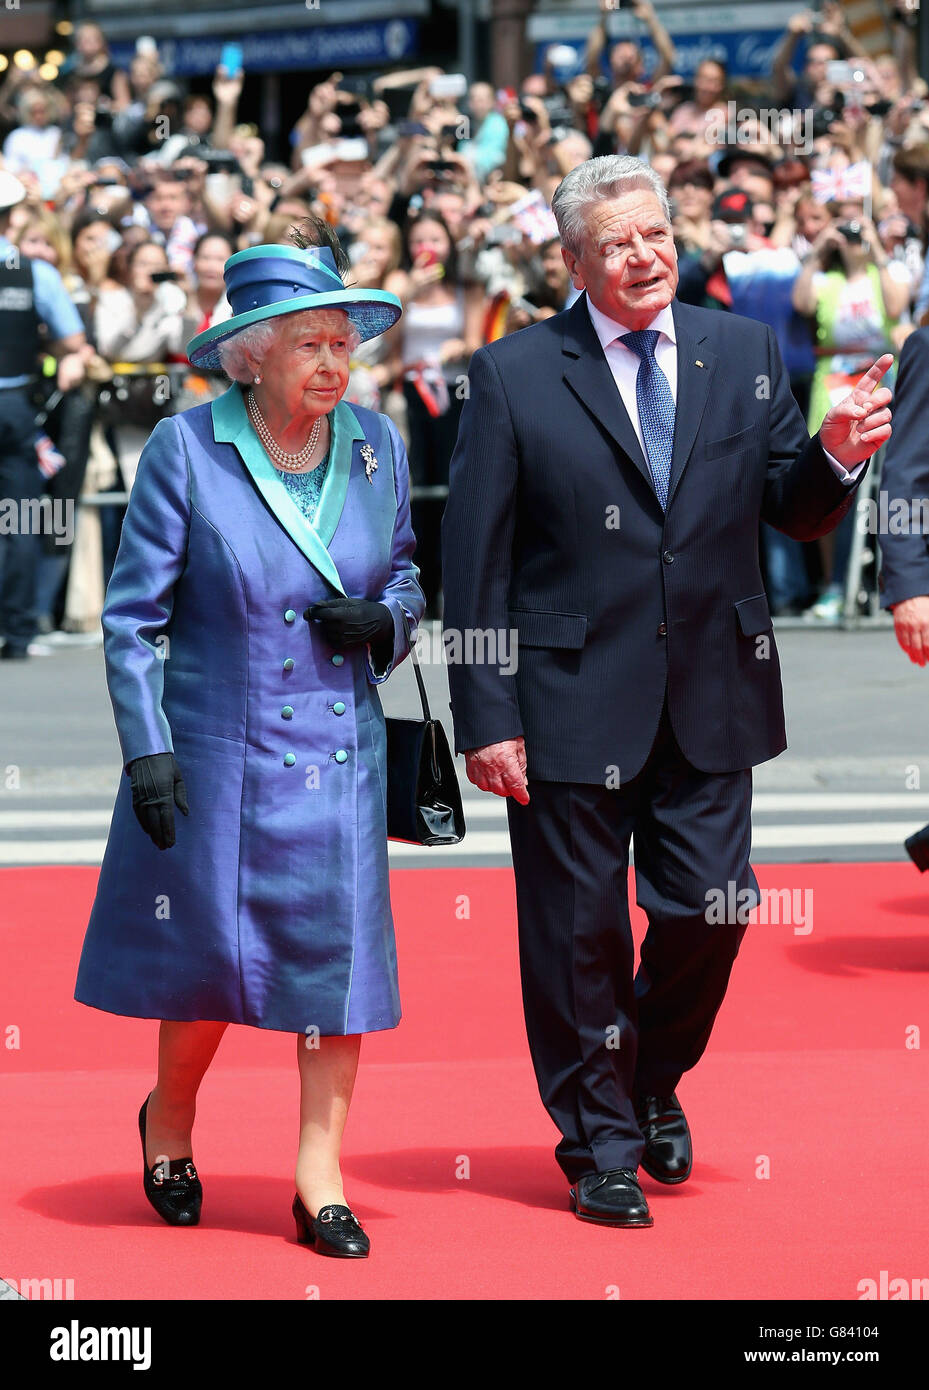 Queen Elizabeth II walks with German President Joachim Gauck as she visits St Paul's Church in Frankfurt on the second full day of a four day State visit to Germany. Stock Photo